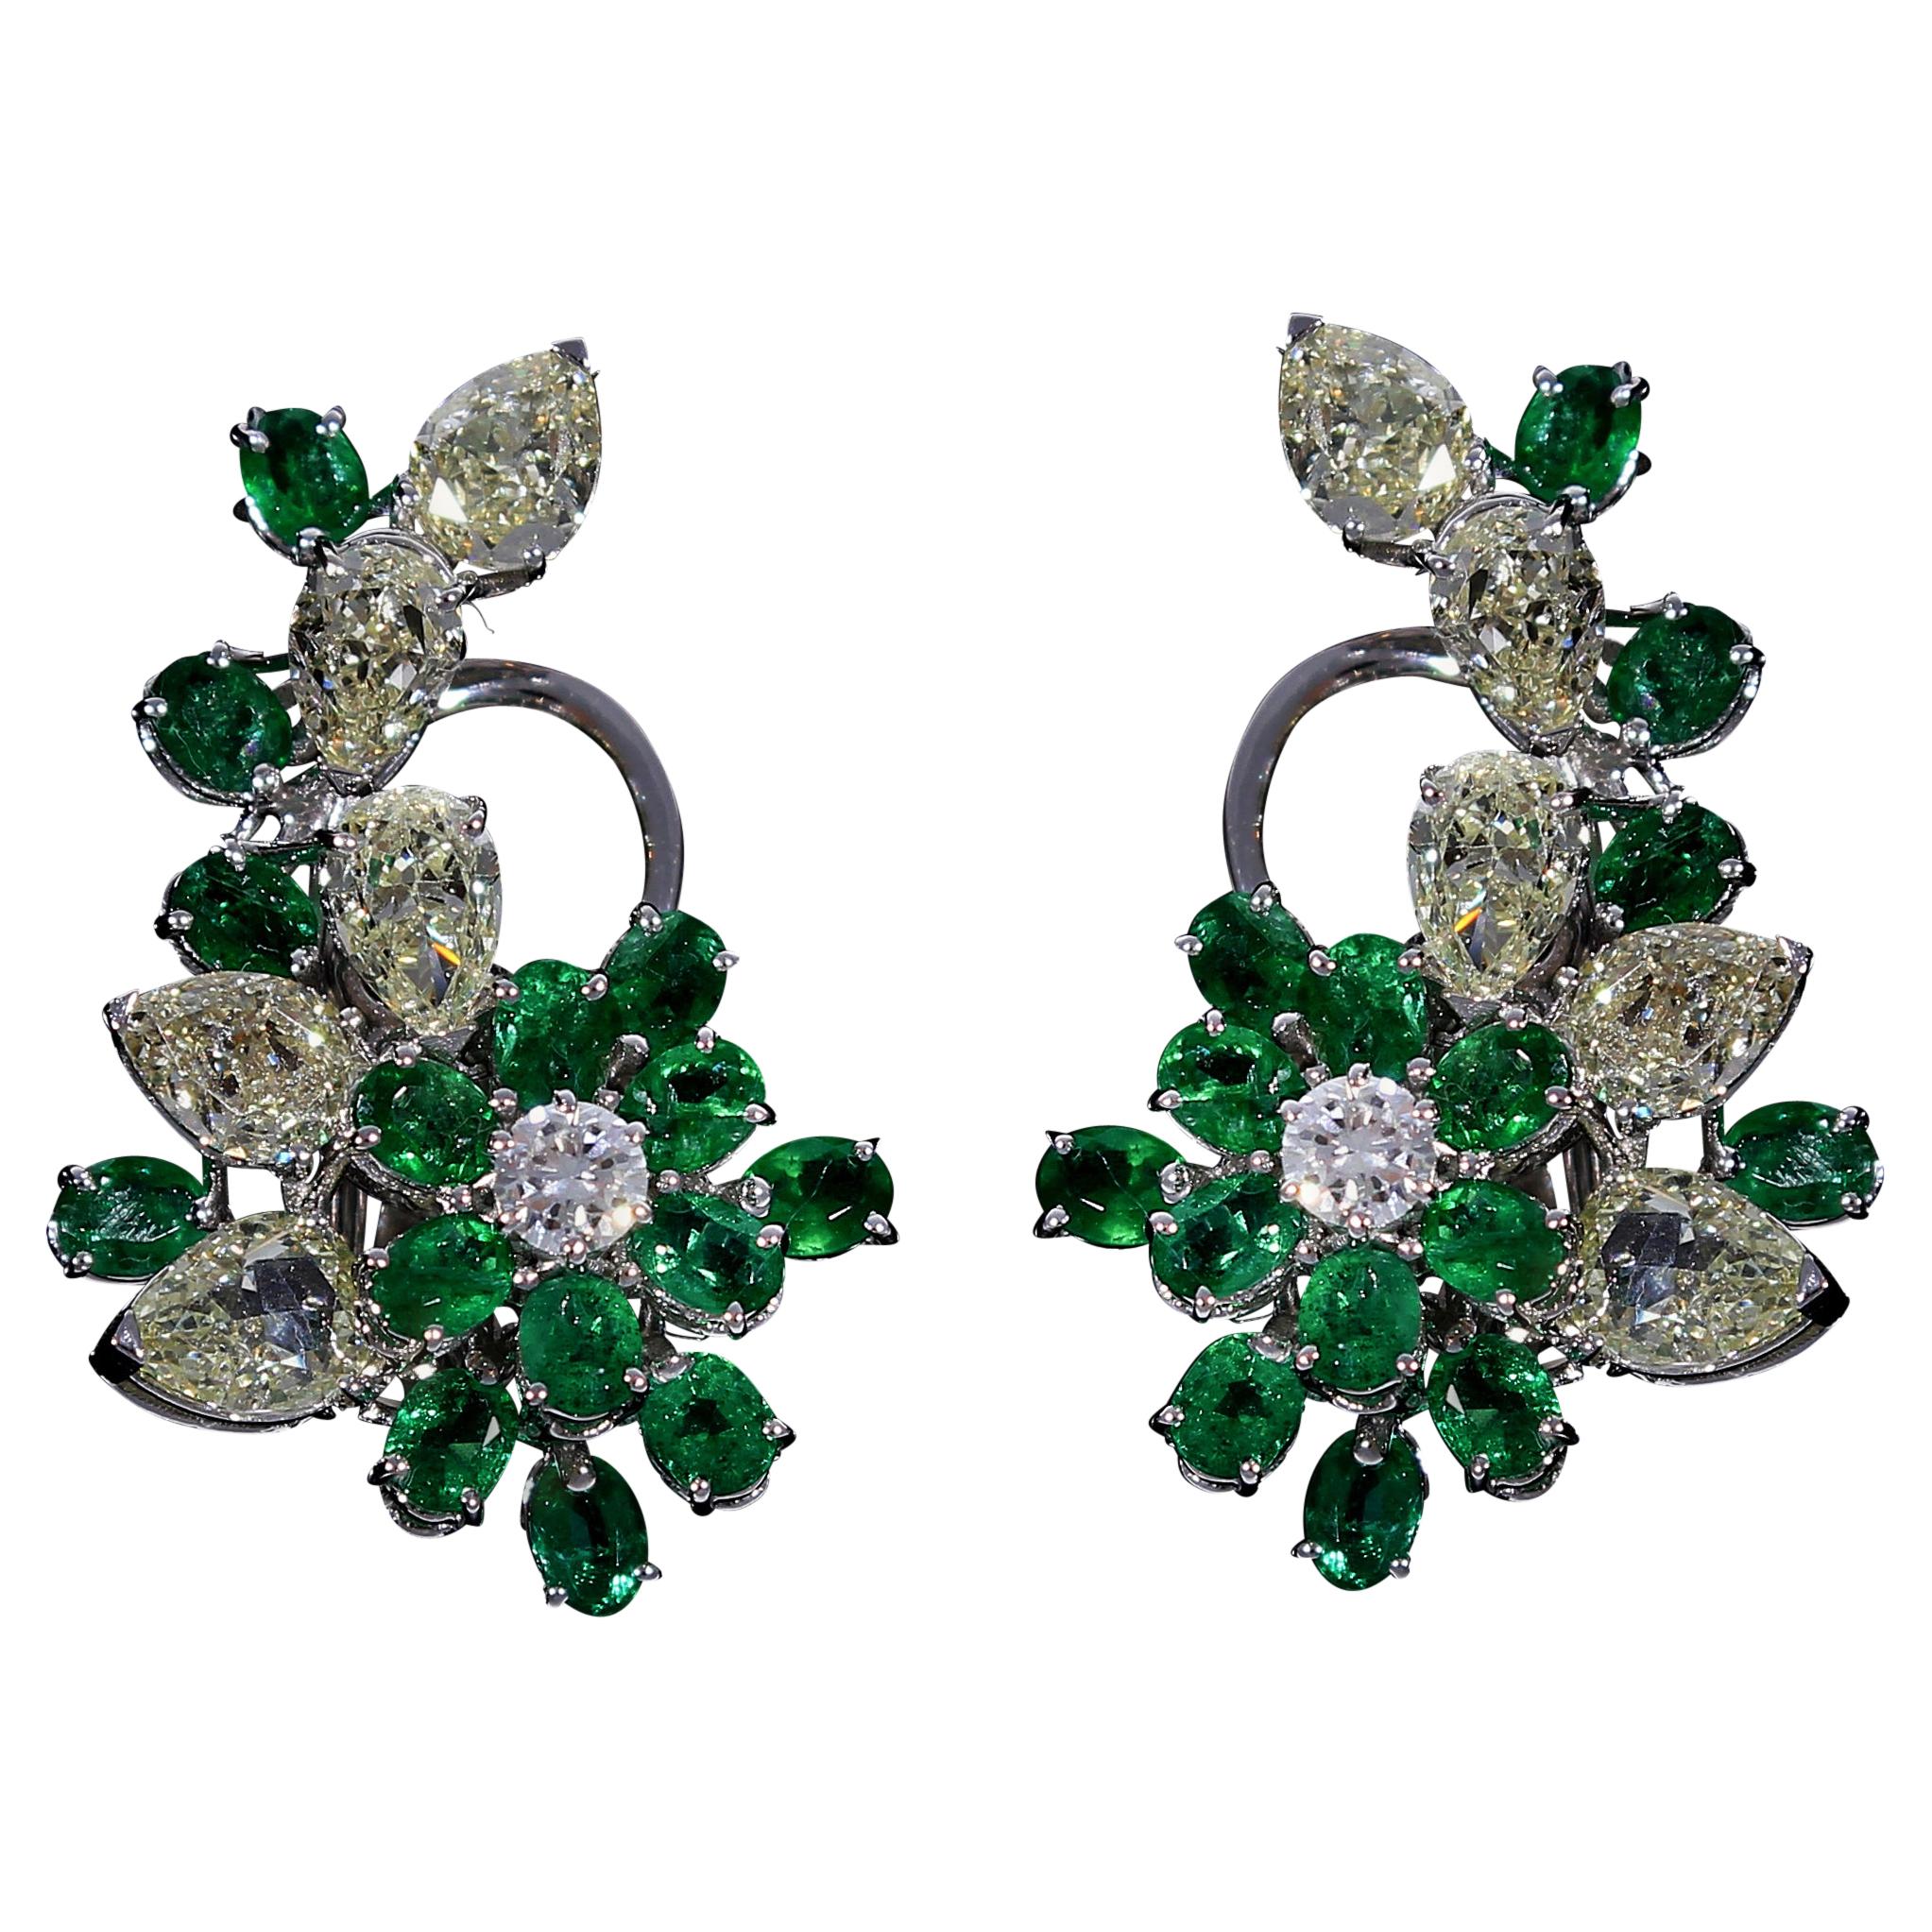 Cluster Earring of Diamonds and Pear-Cut Emeralds 18 Kt White Gold Made in Italy